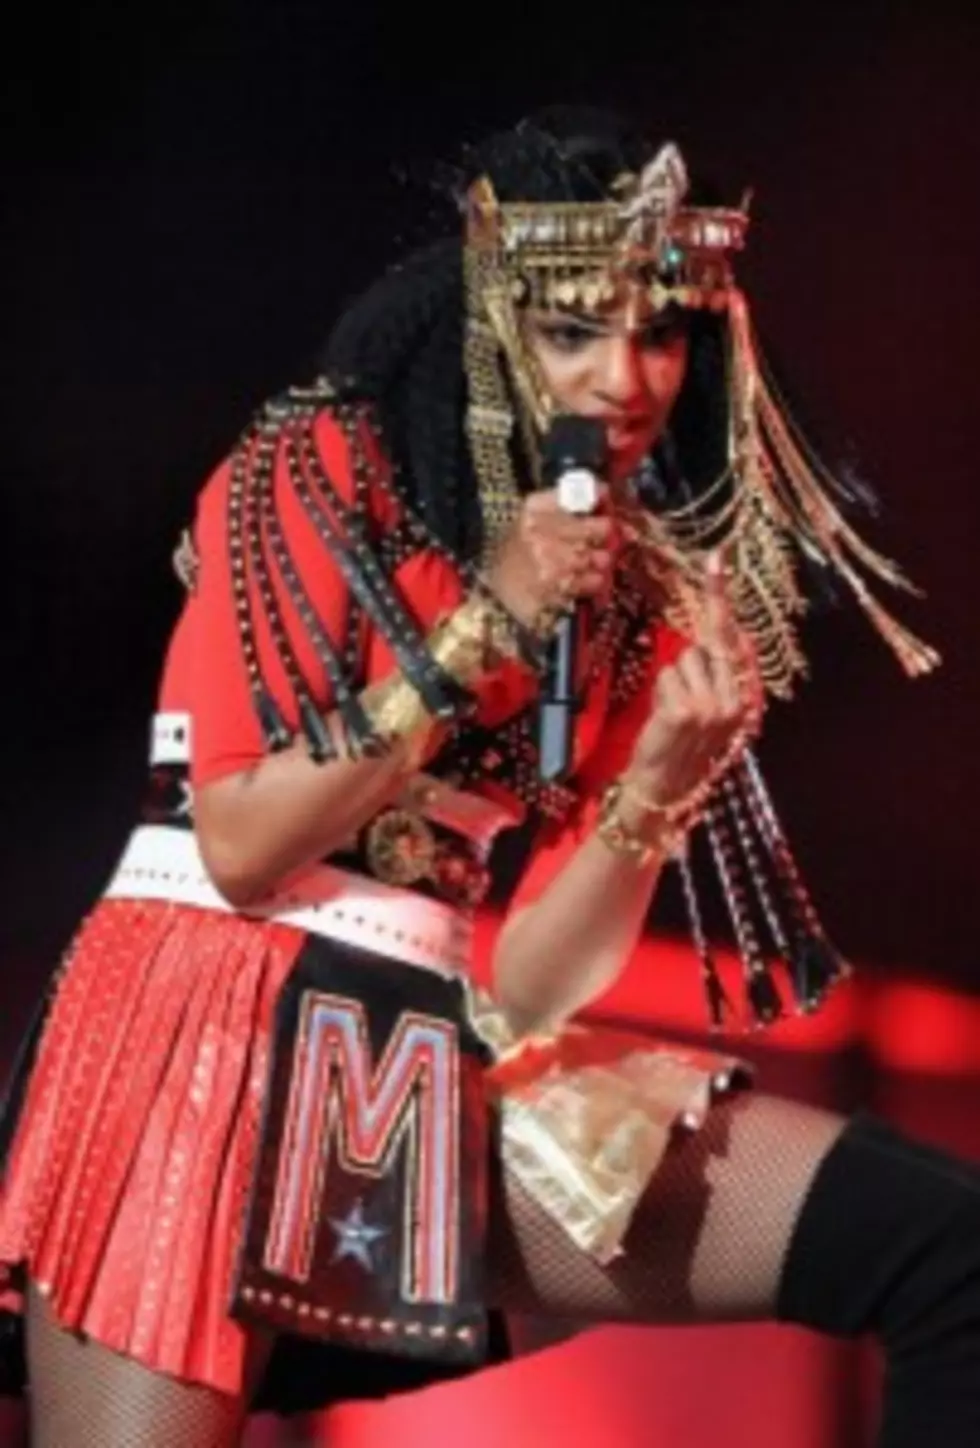 Were You Offended By M.I.A.&#8217;s Gesture During The Halftime Show?? [POLL]